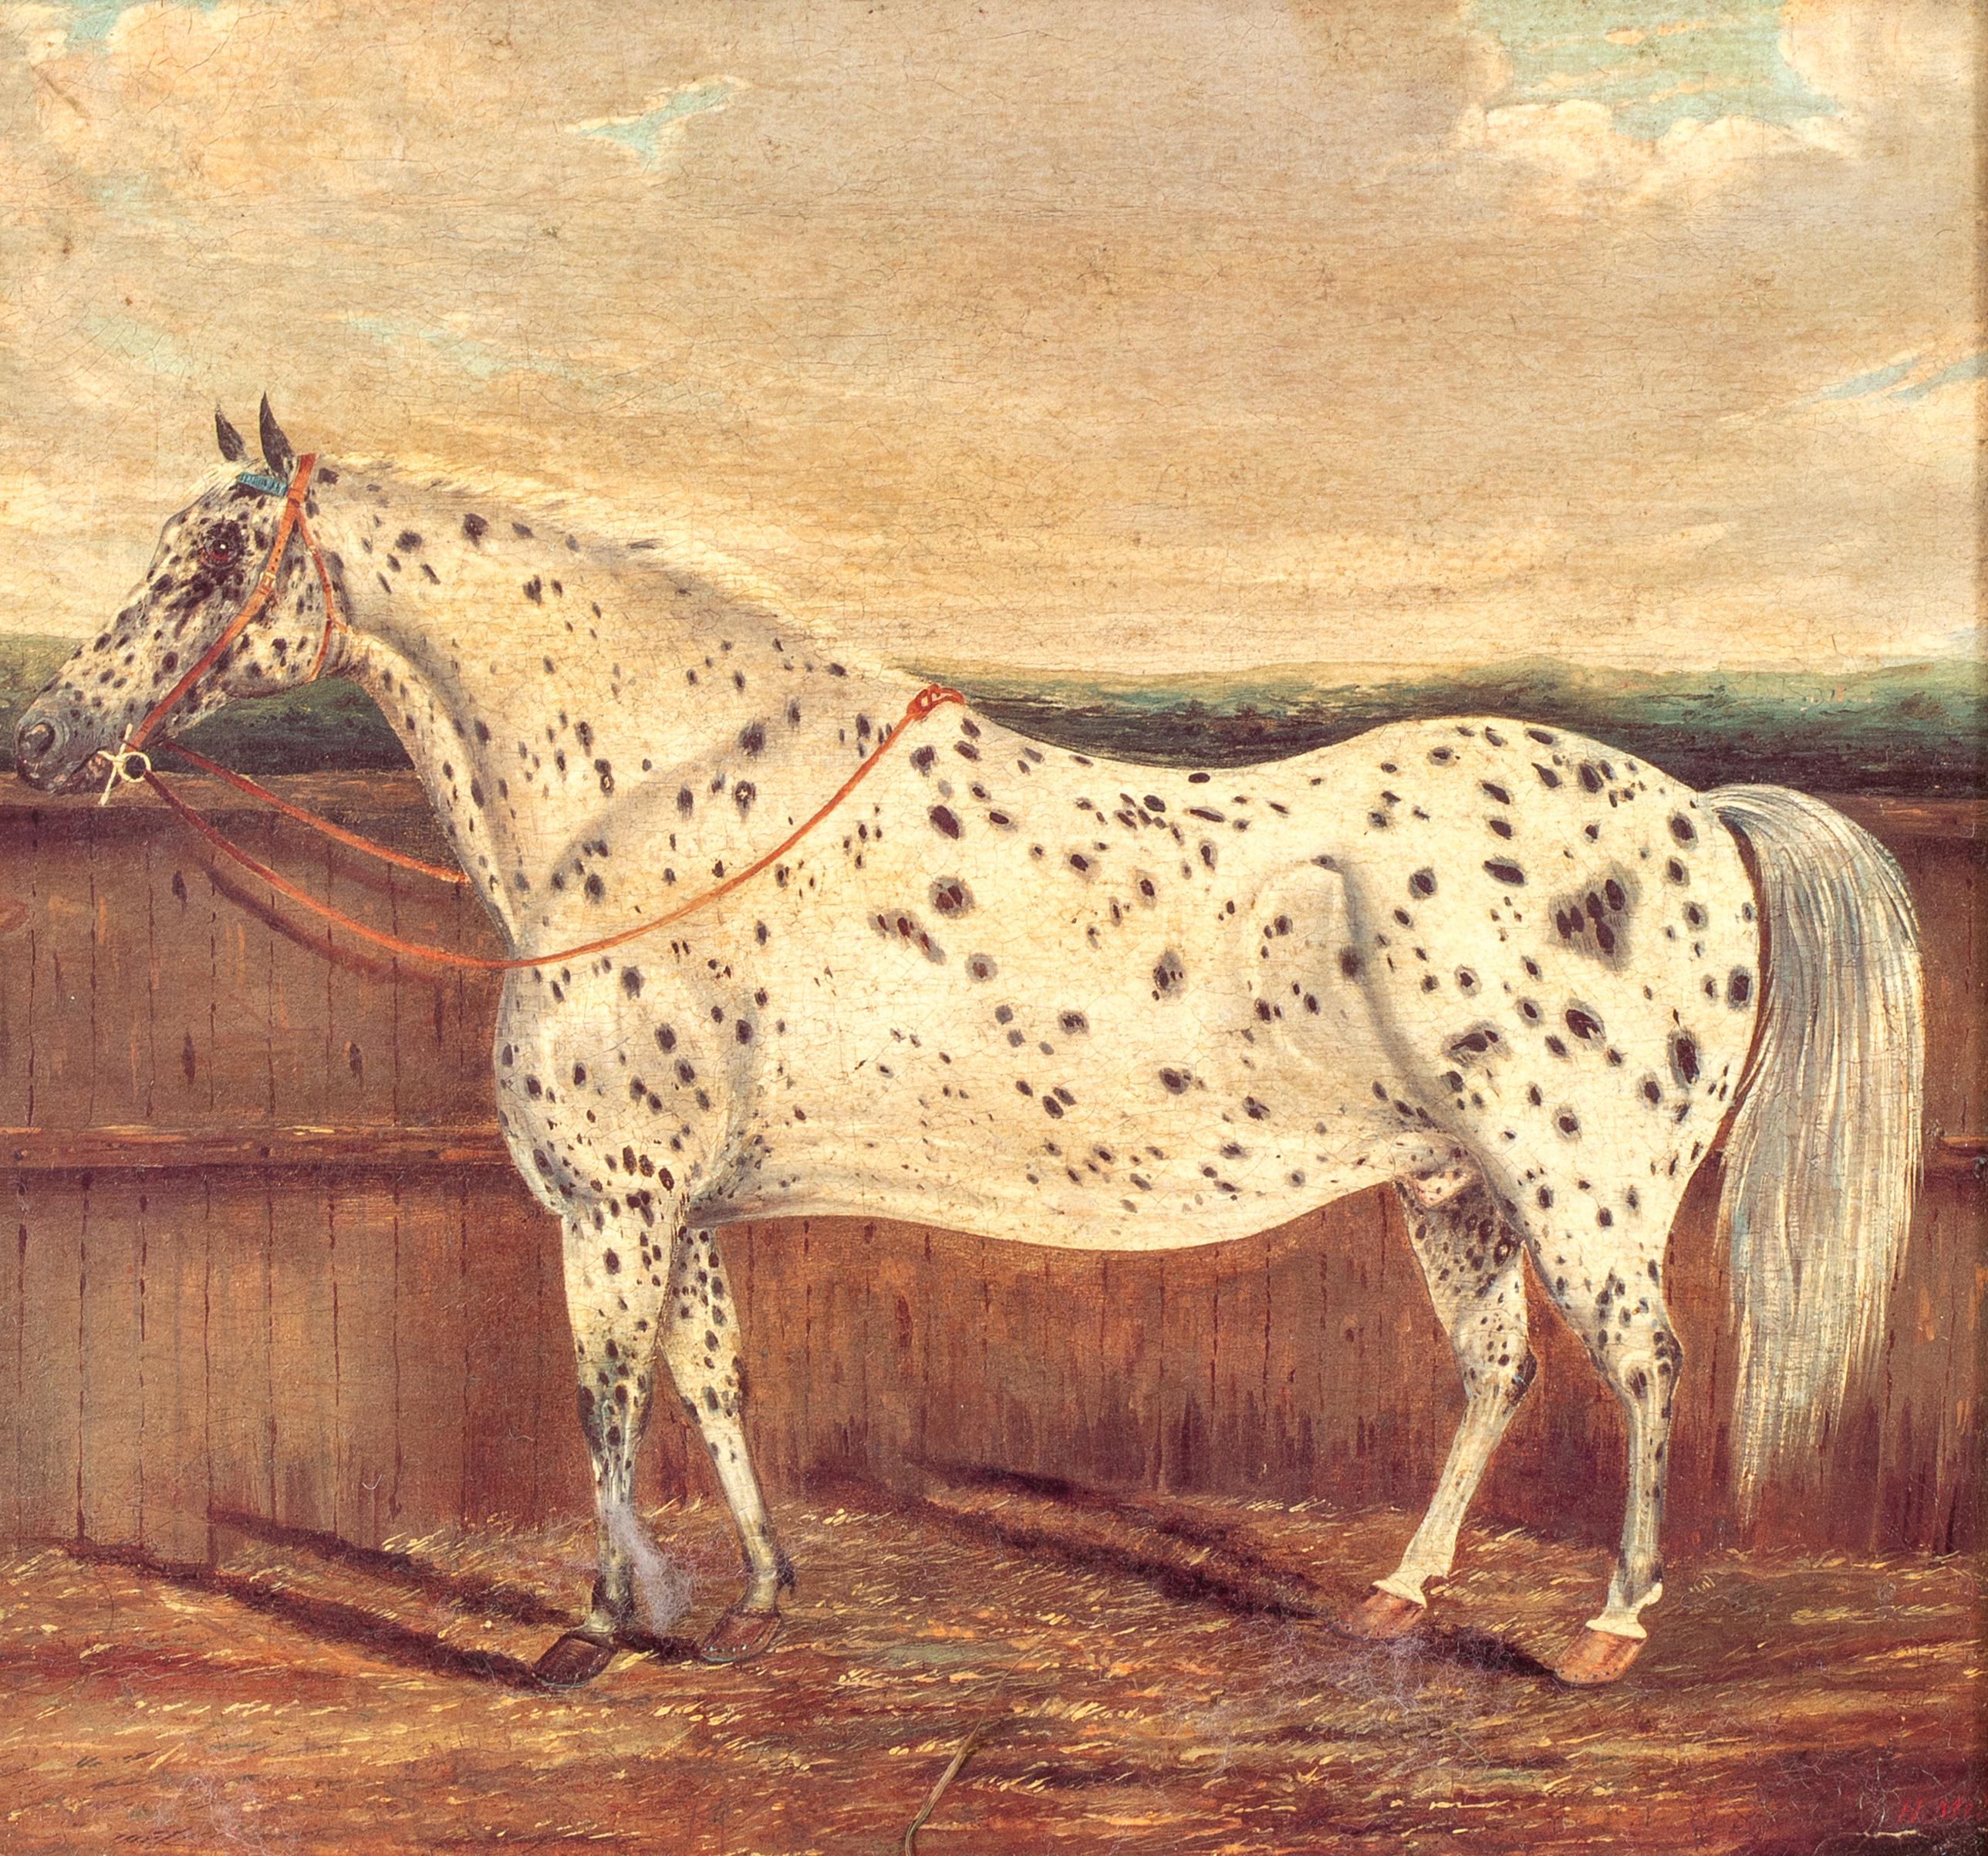 Study of An Appaloosa Horse, 19th Century

by H Milnes (19th Century British)

19th Century portrait of An Appaloosa Horse in a yard, oil on board by H Milnes. Rare early portrait of the breed now popular in the Americas since its introduction